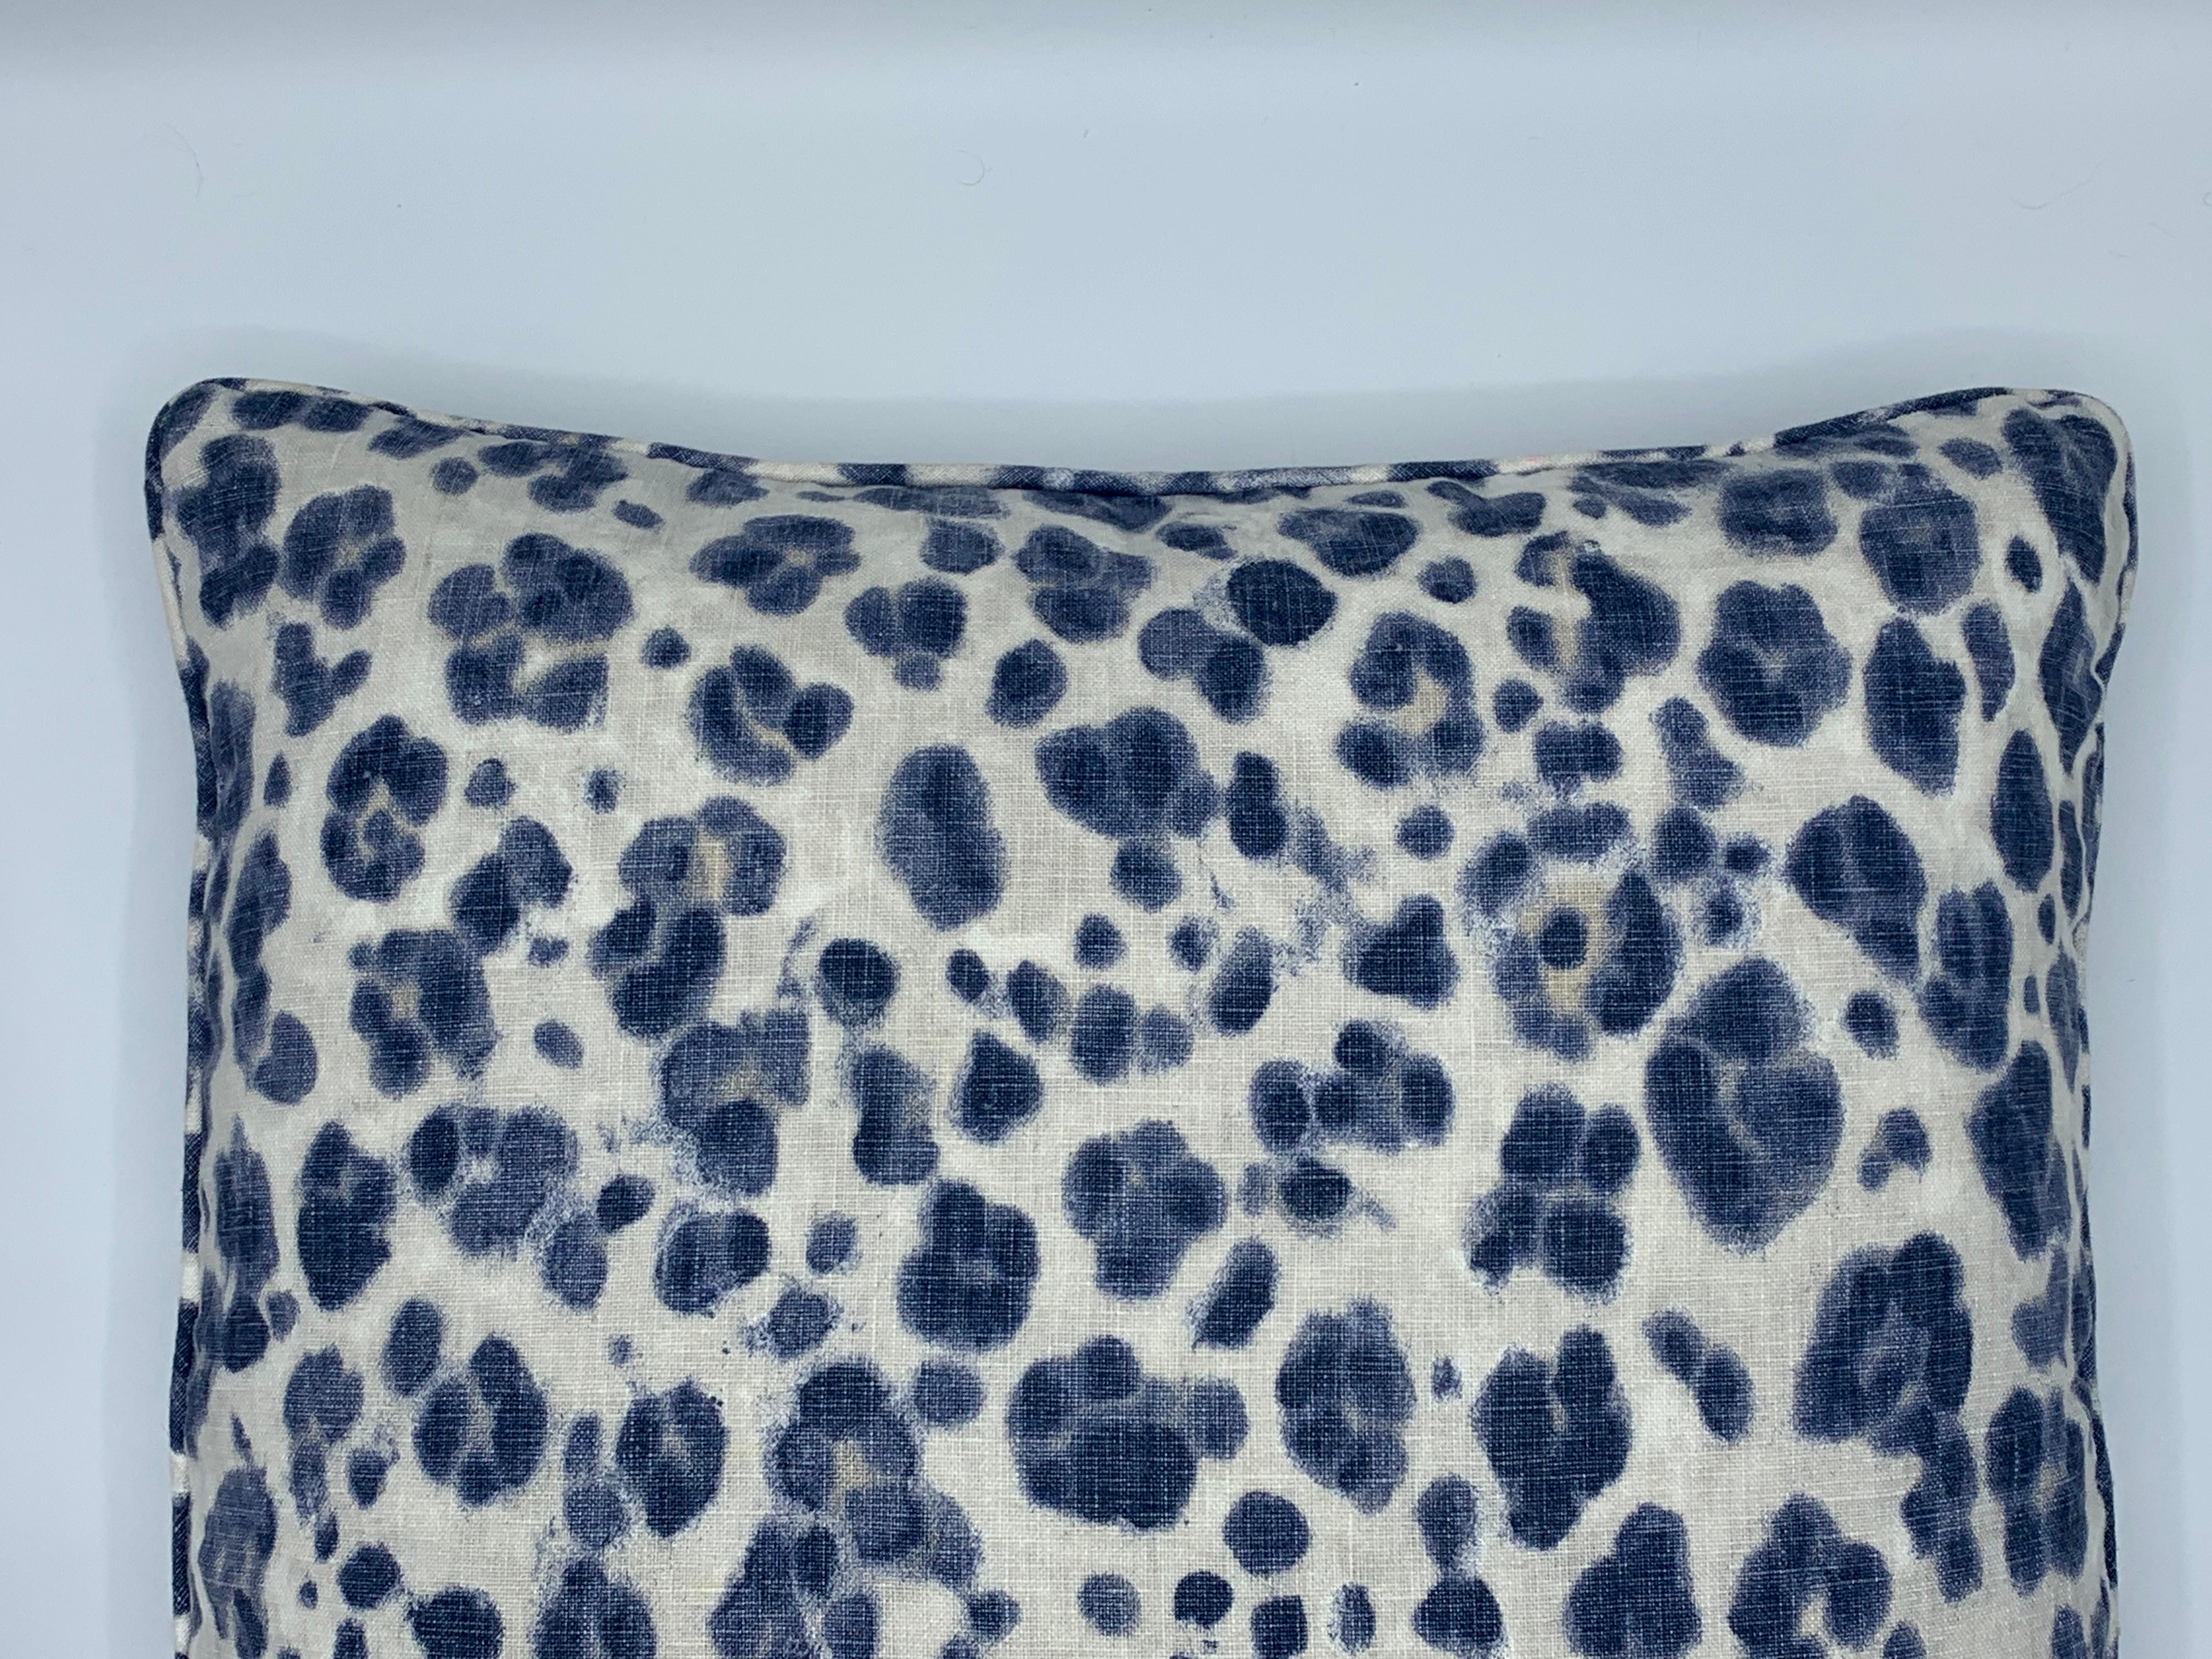 Offered is a stunning pair of newly fabricated 'Panthera' pillows, from Thibaut's 'Bridgehampton' collection. The blue and white, panther motif printed linen pillows are truly gorgeous. 20in insert with zipper closure each. See last photo for color